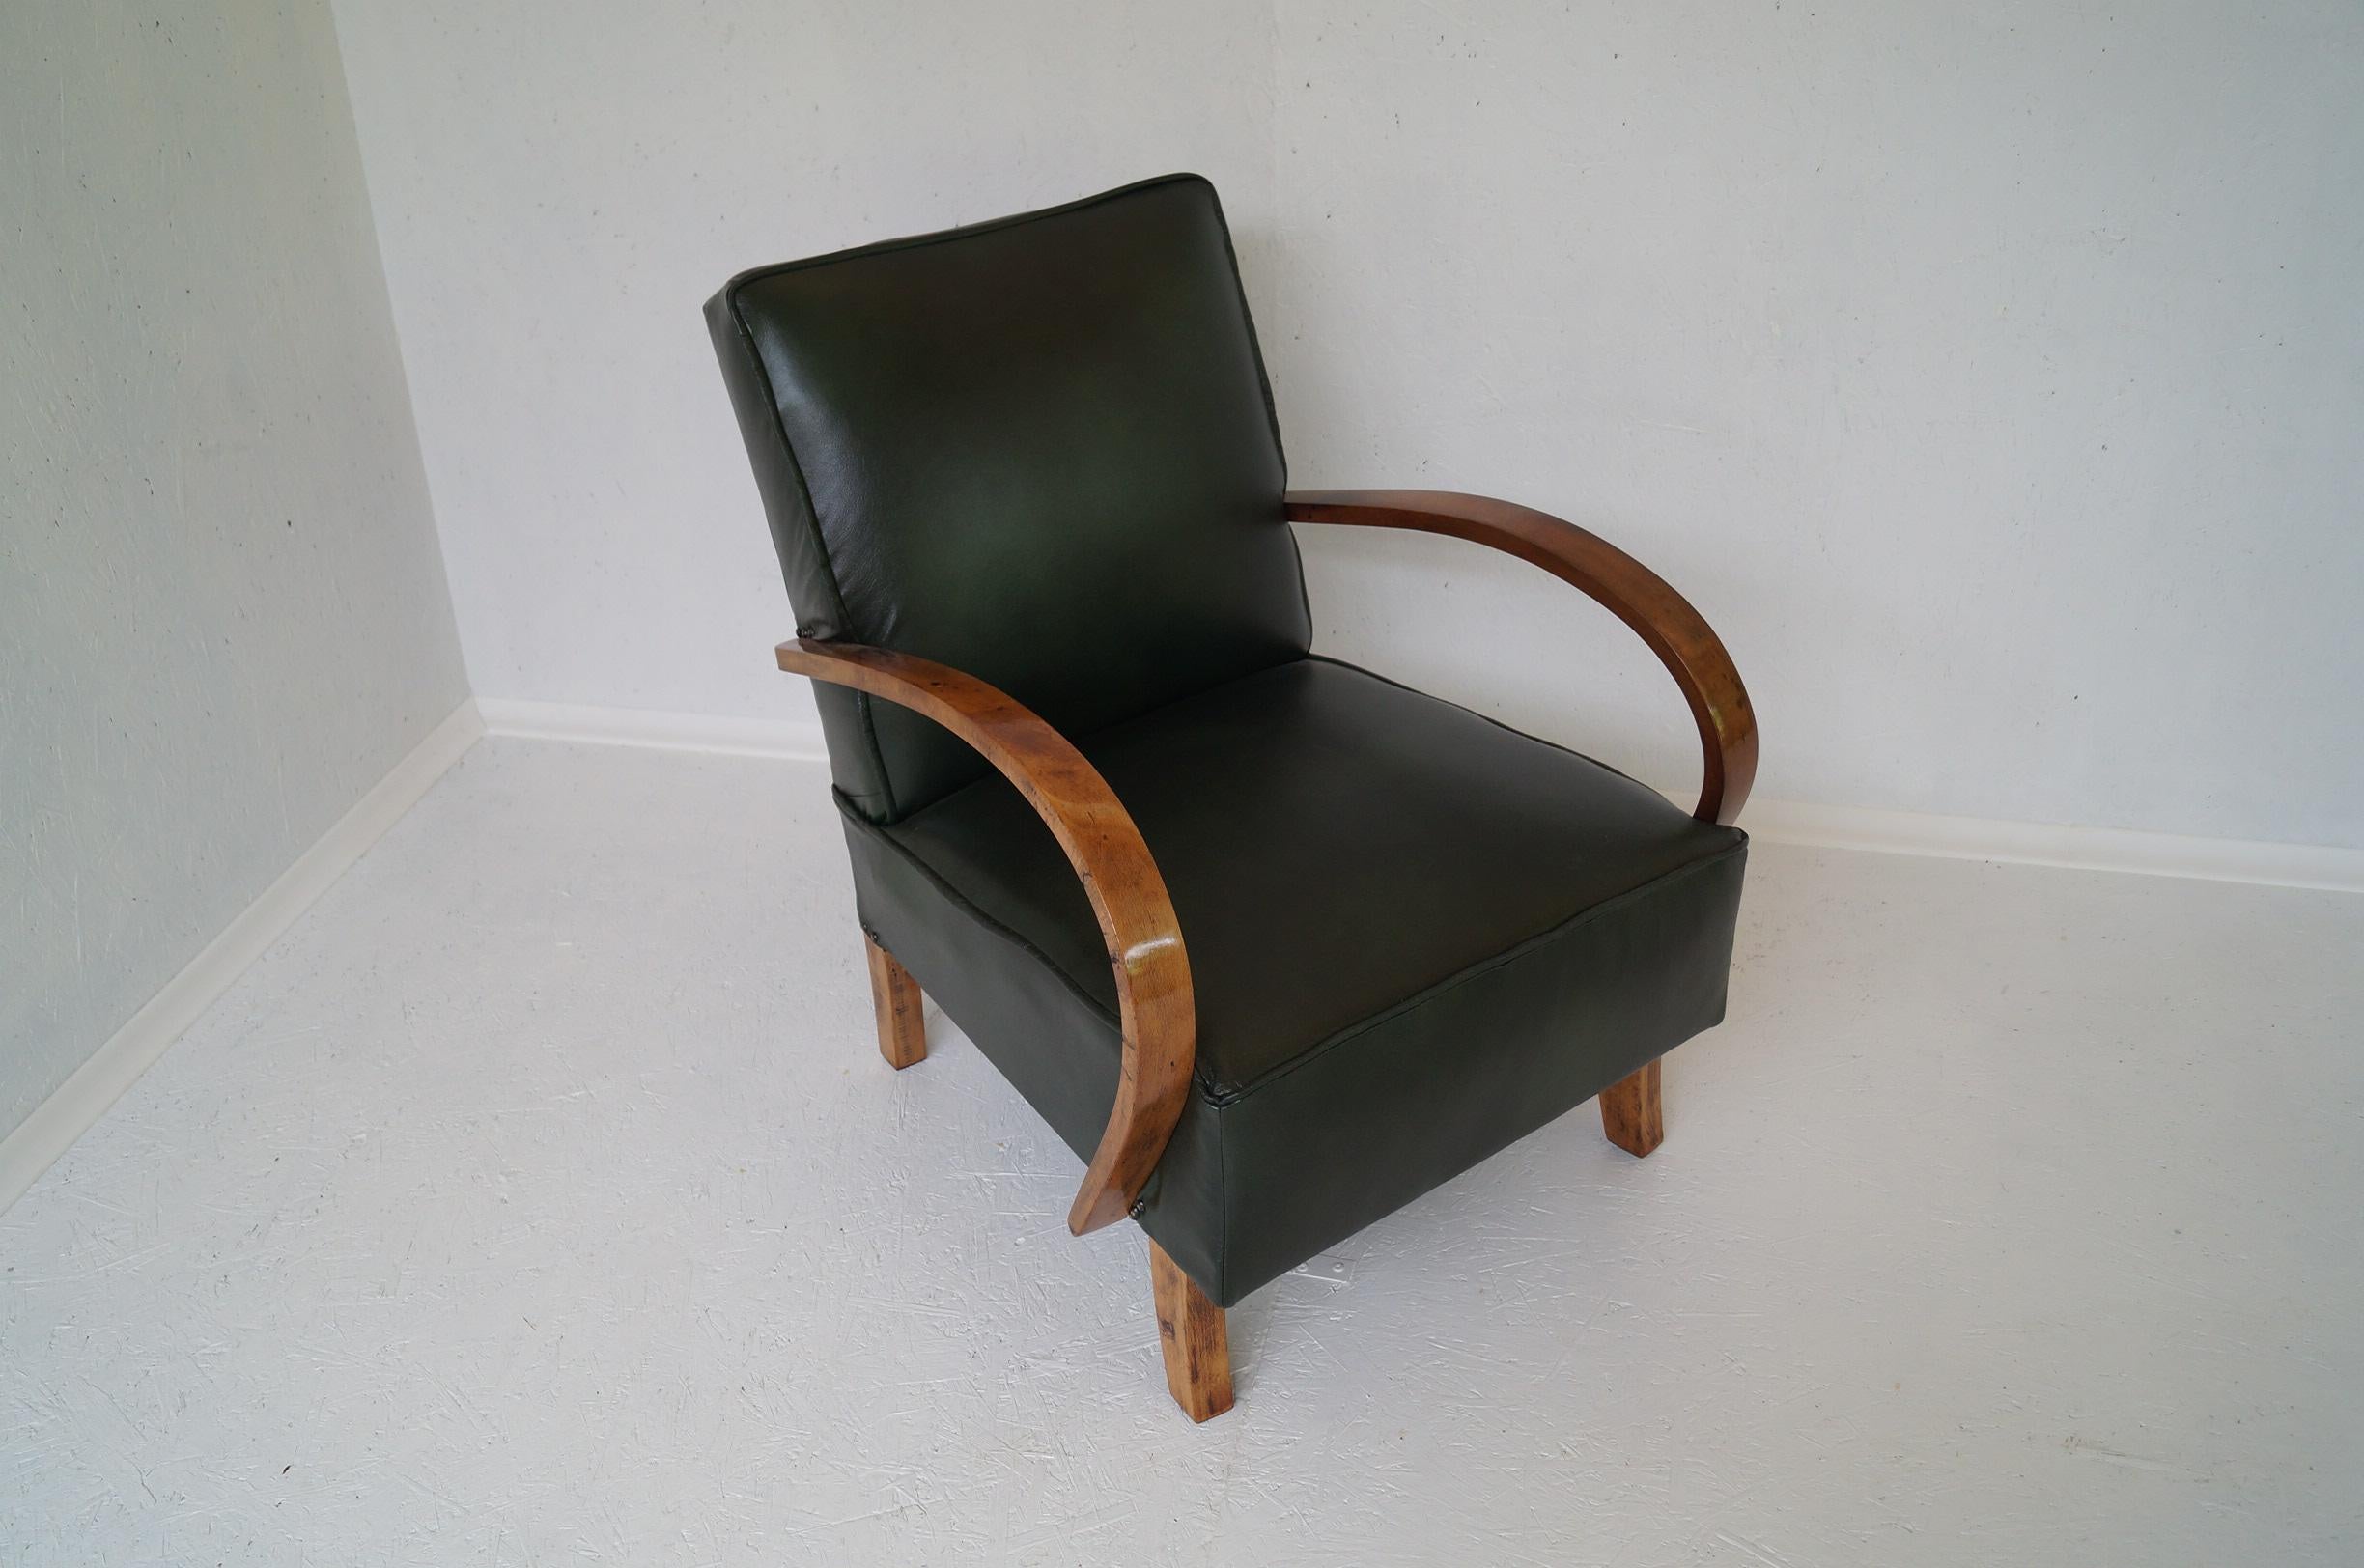  Art Deco armchair skin from 1940 Czech Republic.
Designed by a famous Czech designer Jindrich Halabala, (a Czech designer ranked among the most outstanding creators of the modern period. The peak of his career fell on the 1930s and 1940s when he